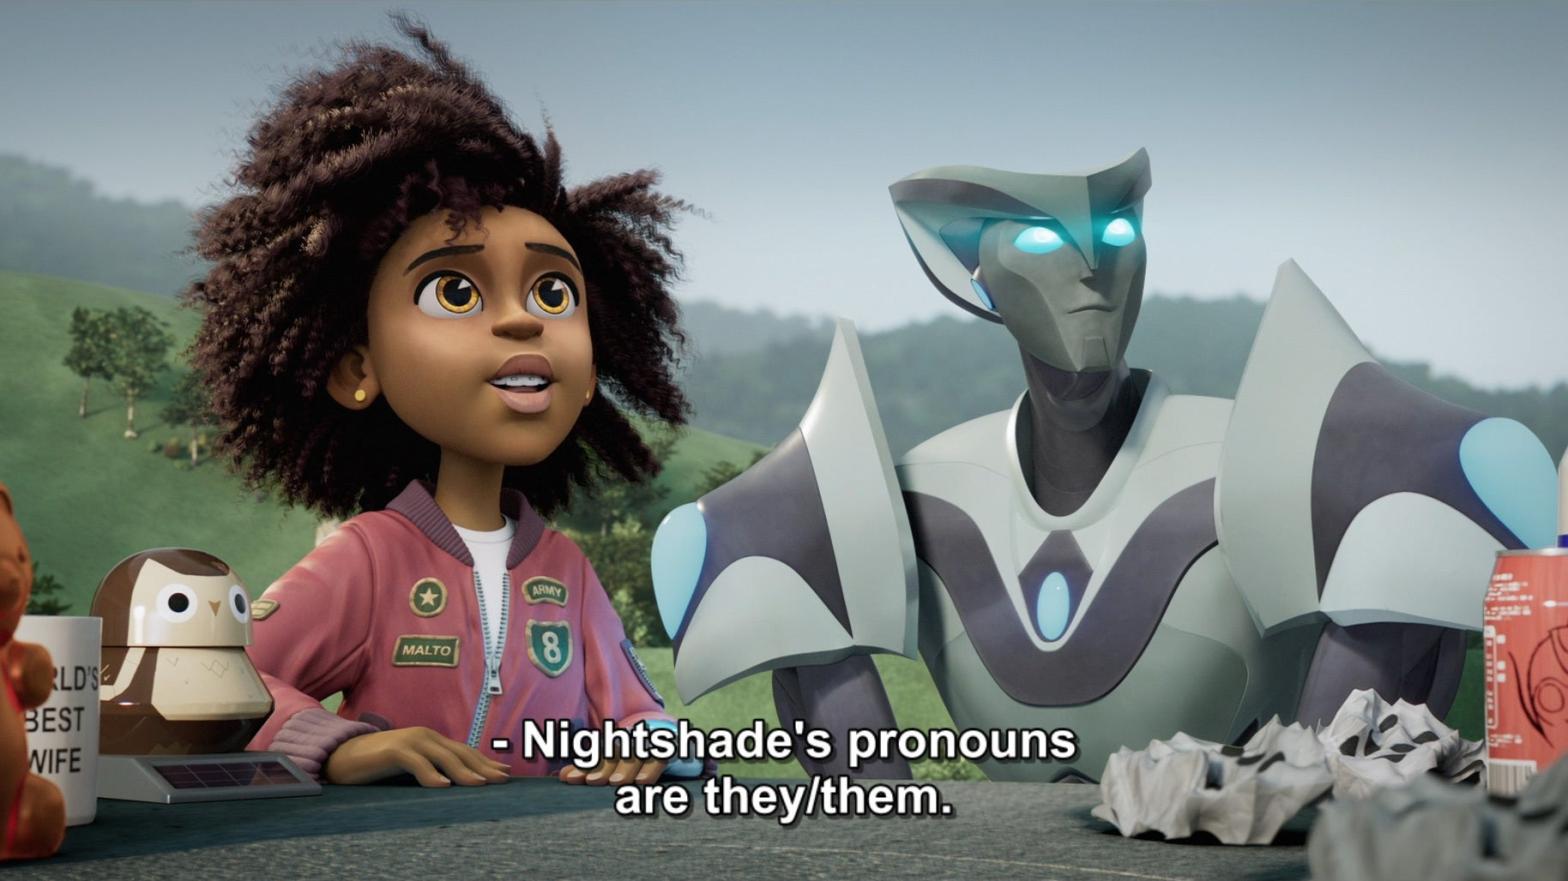 Transformers: EarthSpark finally adds a nonbinary Transformer to the franchise's roster. (Screenshot: Paramount Plus / Nickelodeon / Kotaku)